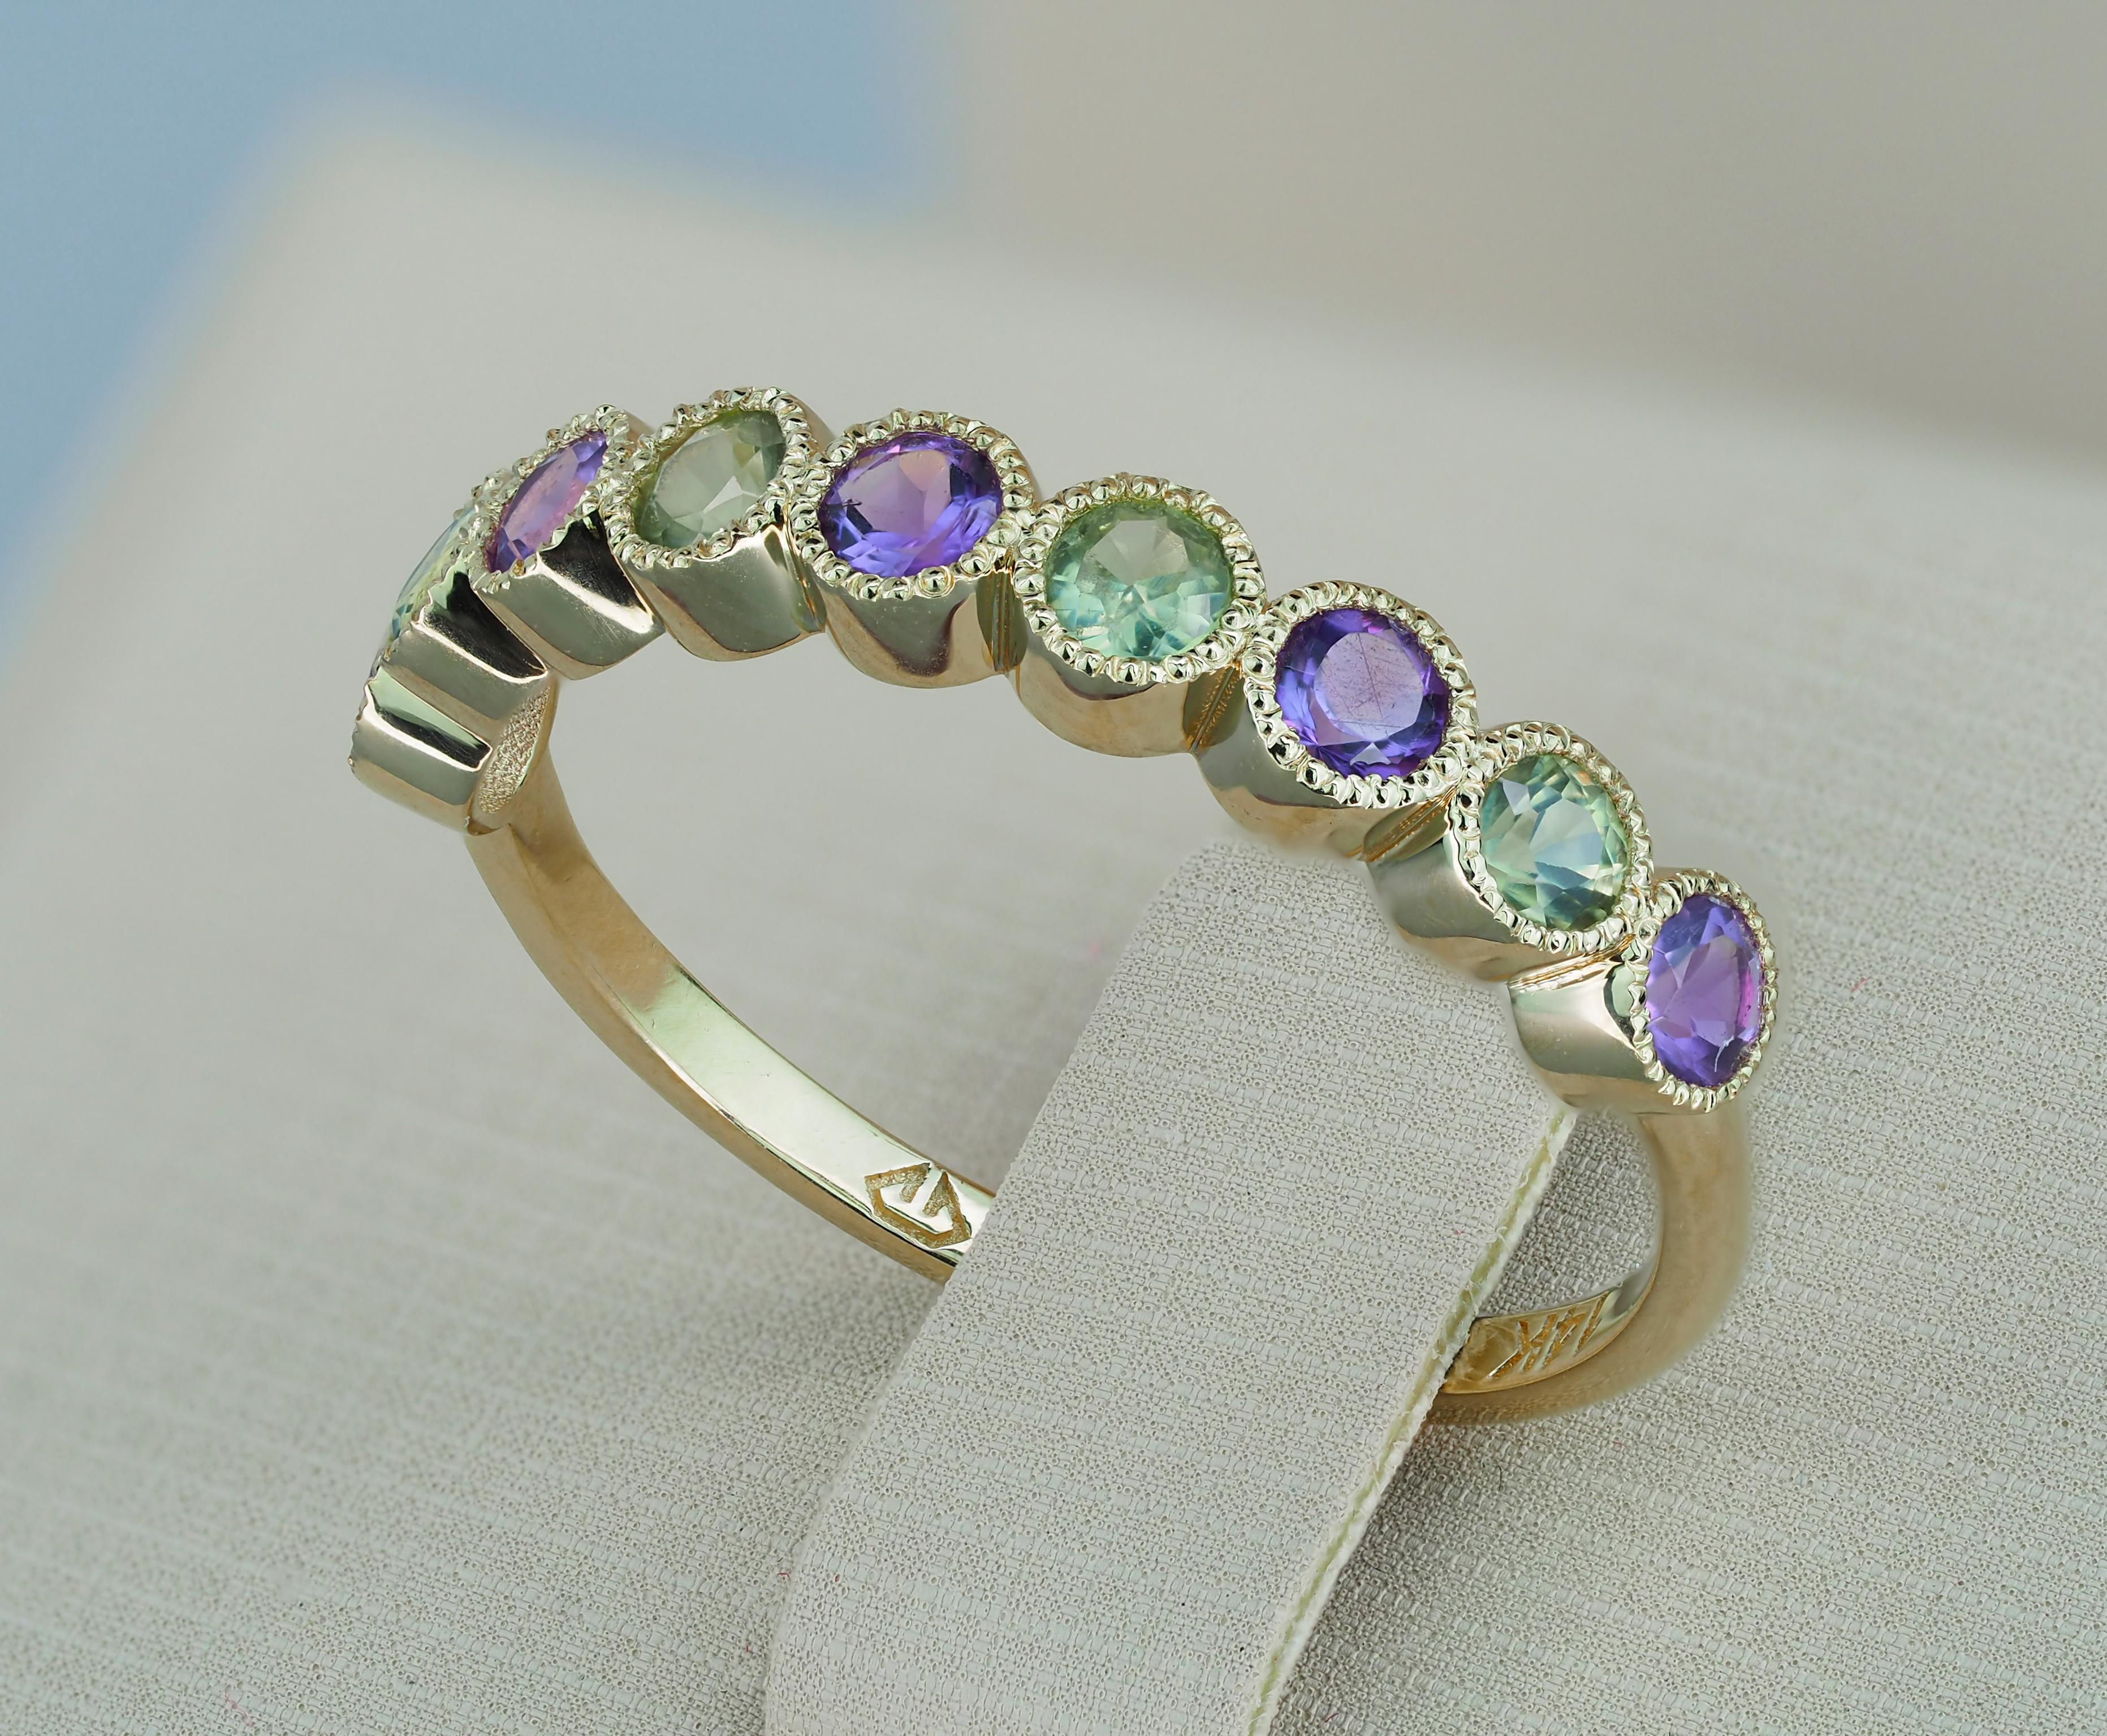 For Sale:  Green Sapphire, Amethyst Pave 14k gold half eternity Band. 2